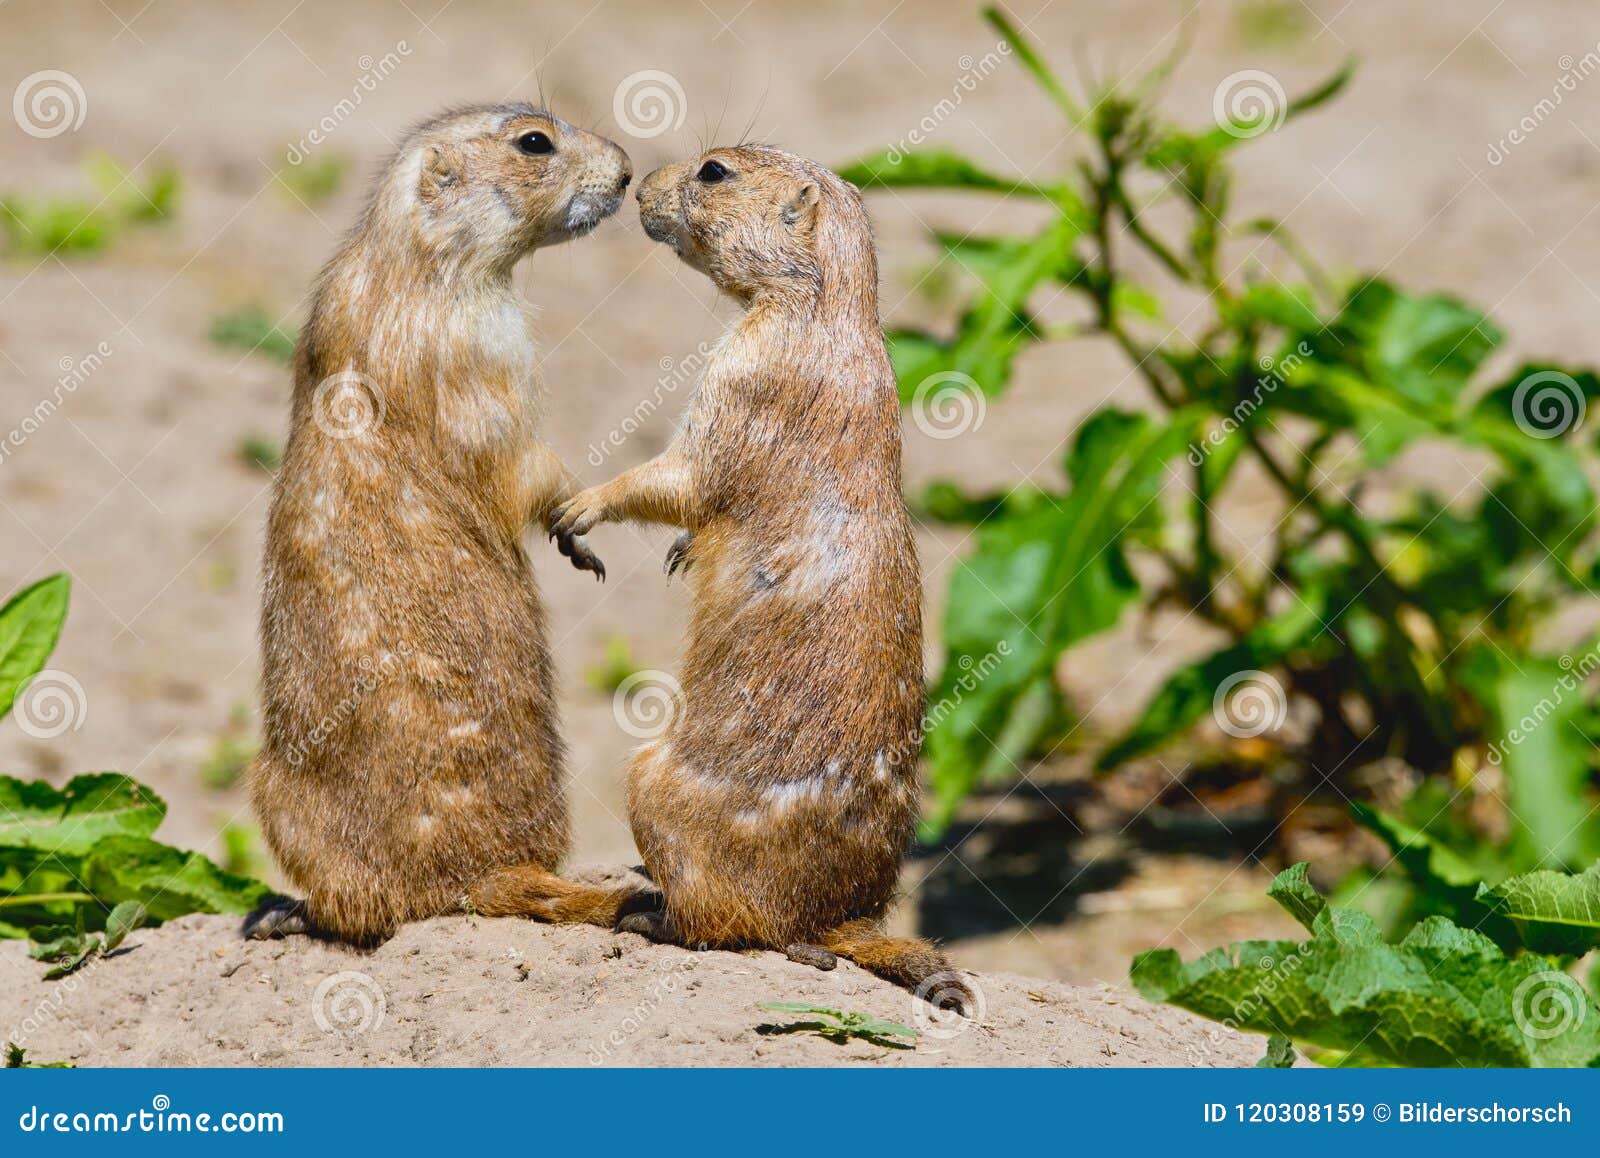 two prairie dogs give each other a kiss